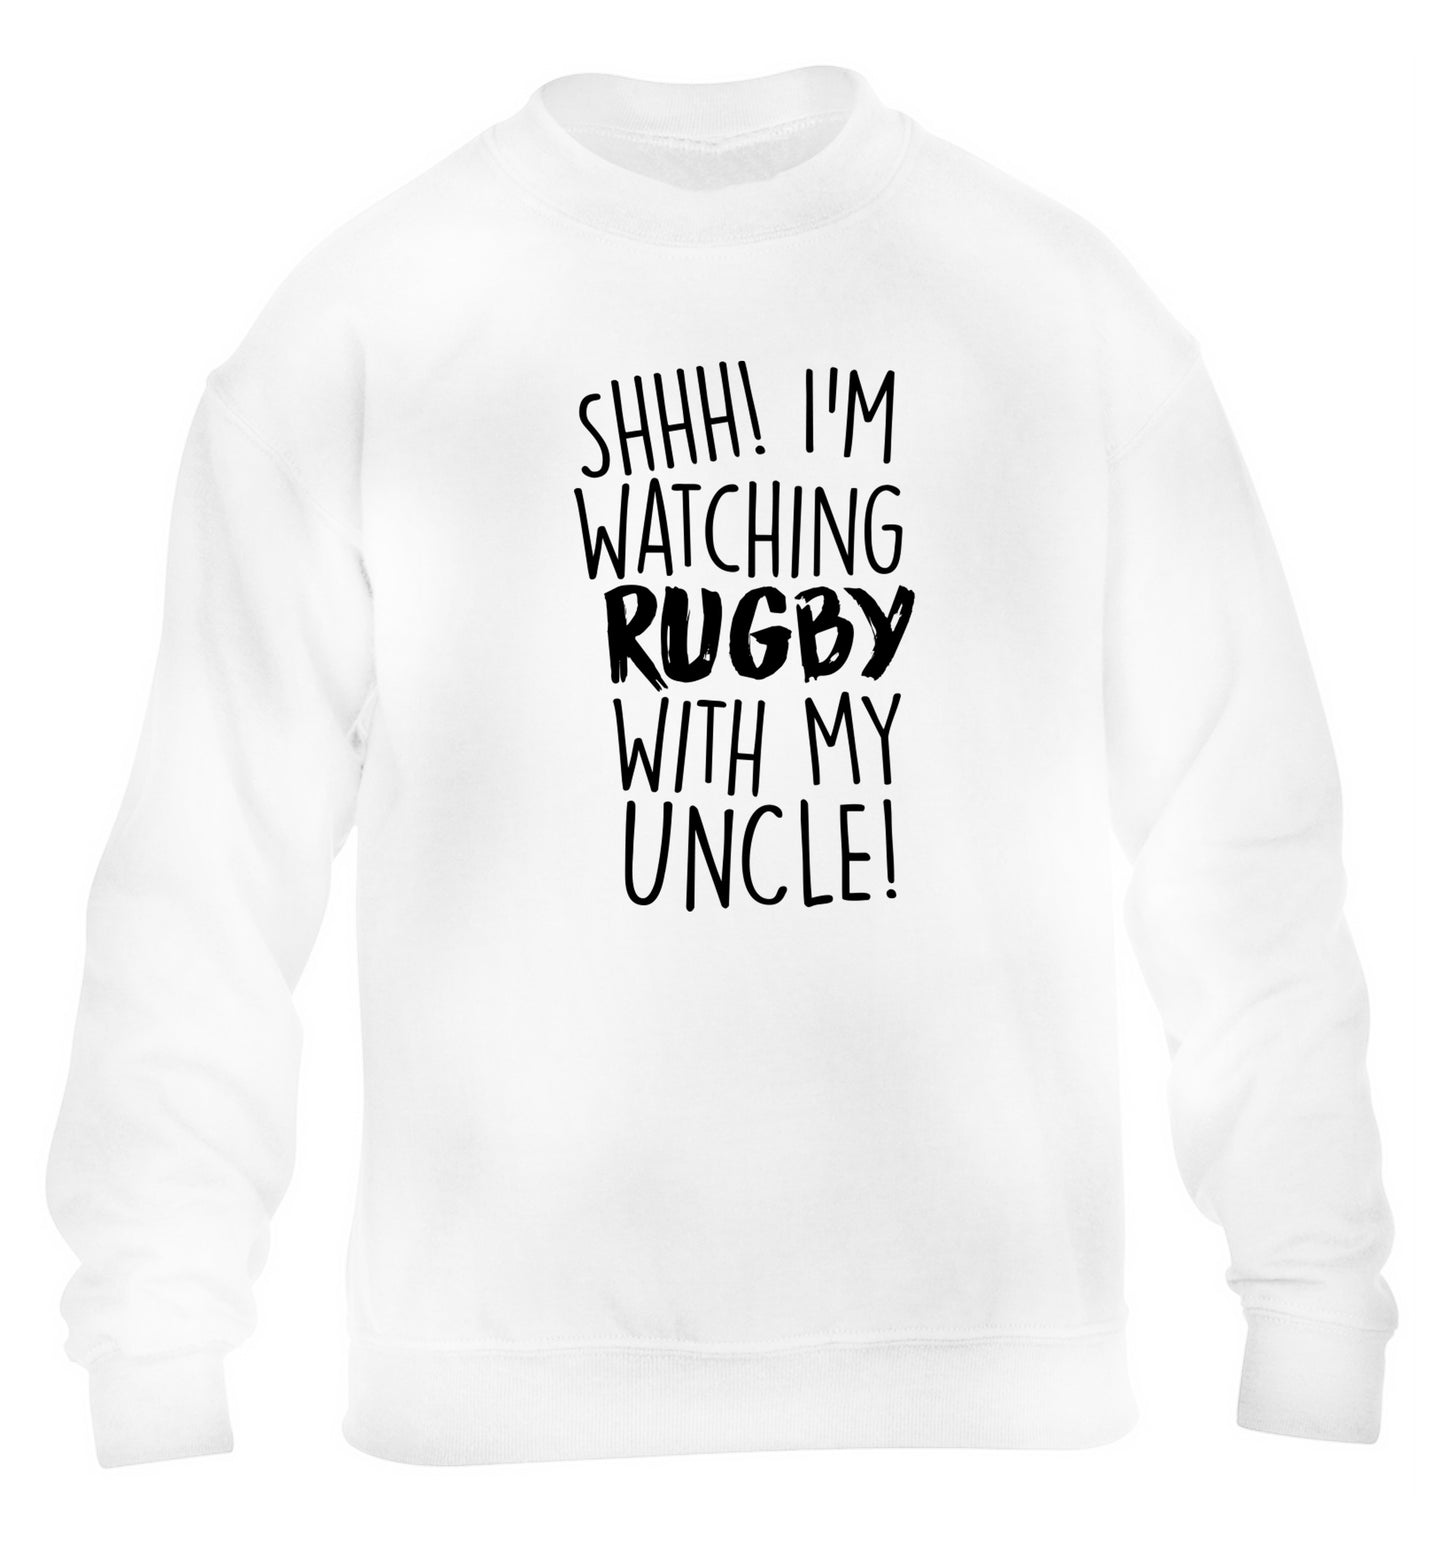 Shh.. I'm watching rugby with my uncle children's white sweater 12-13 Years